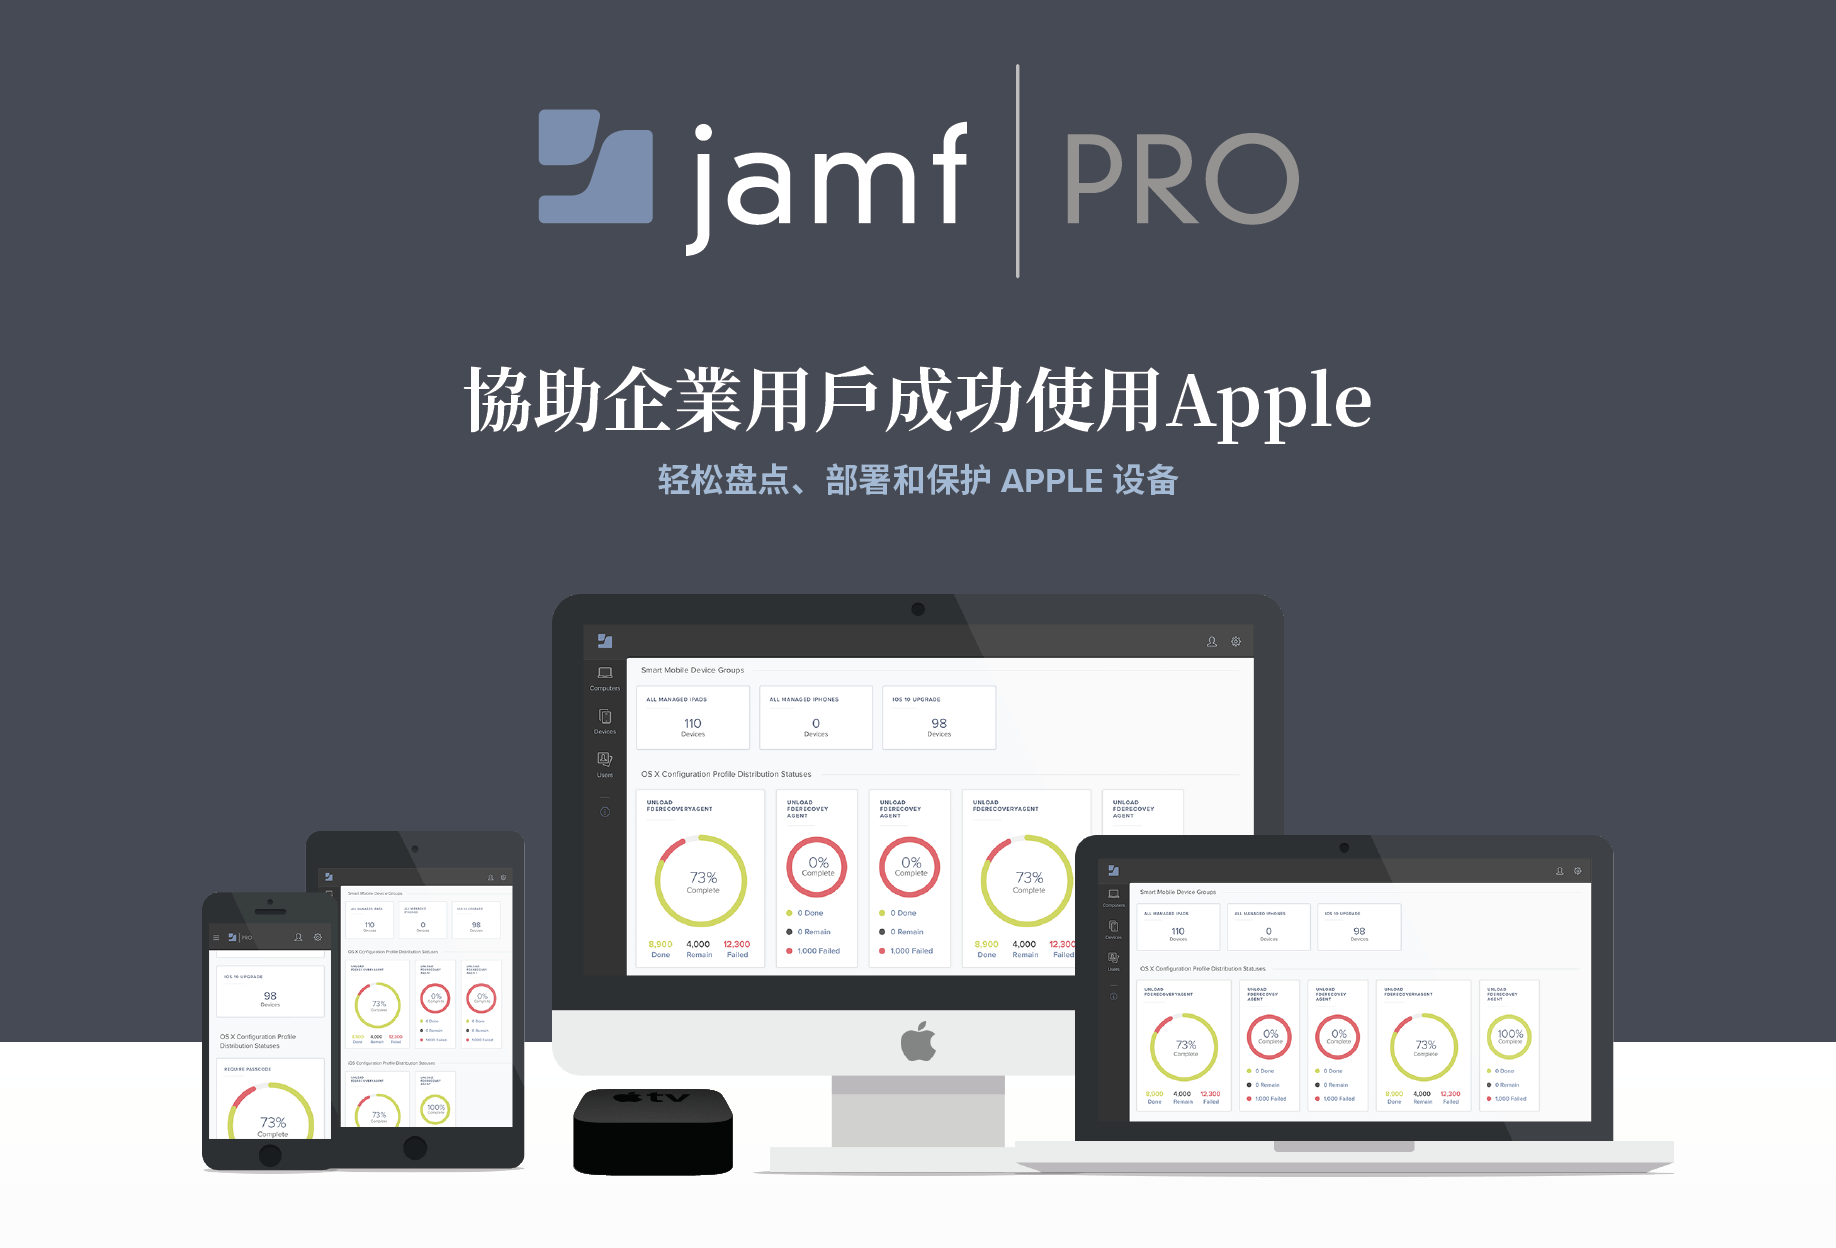 jamf pro system requirements